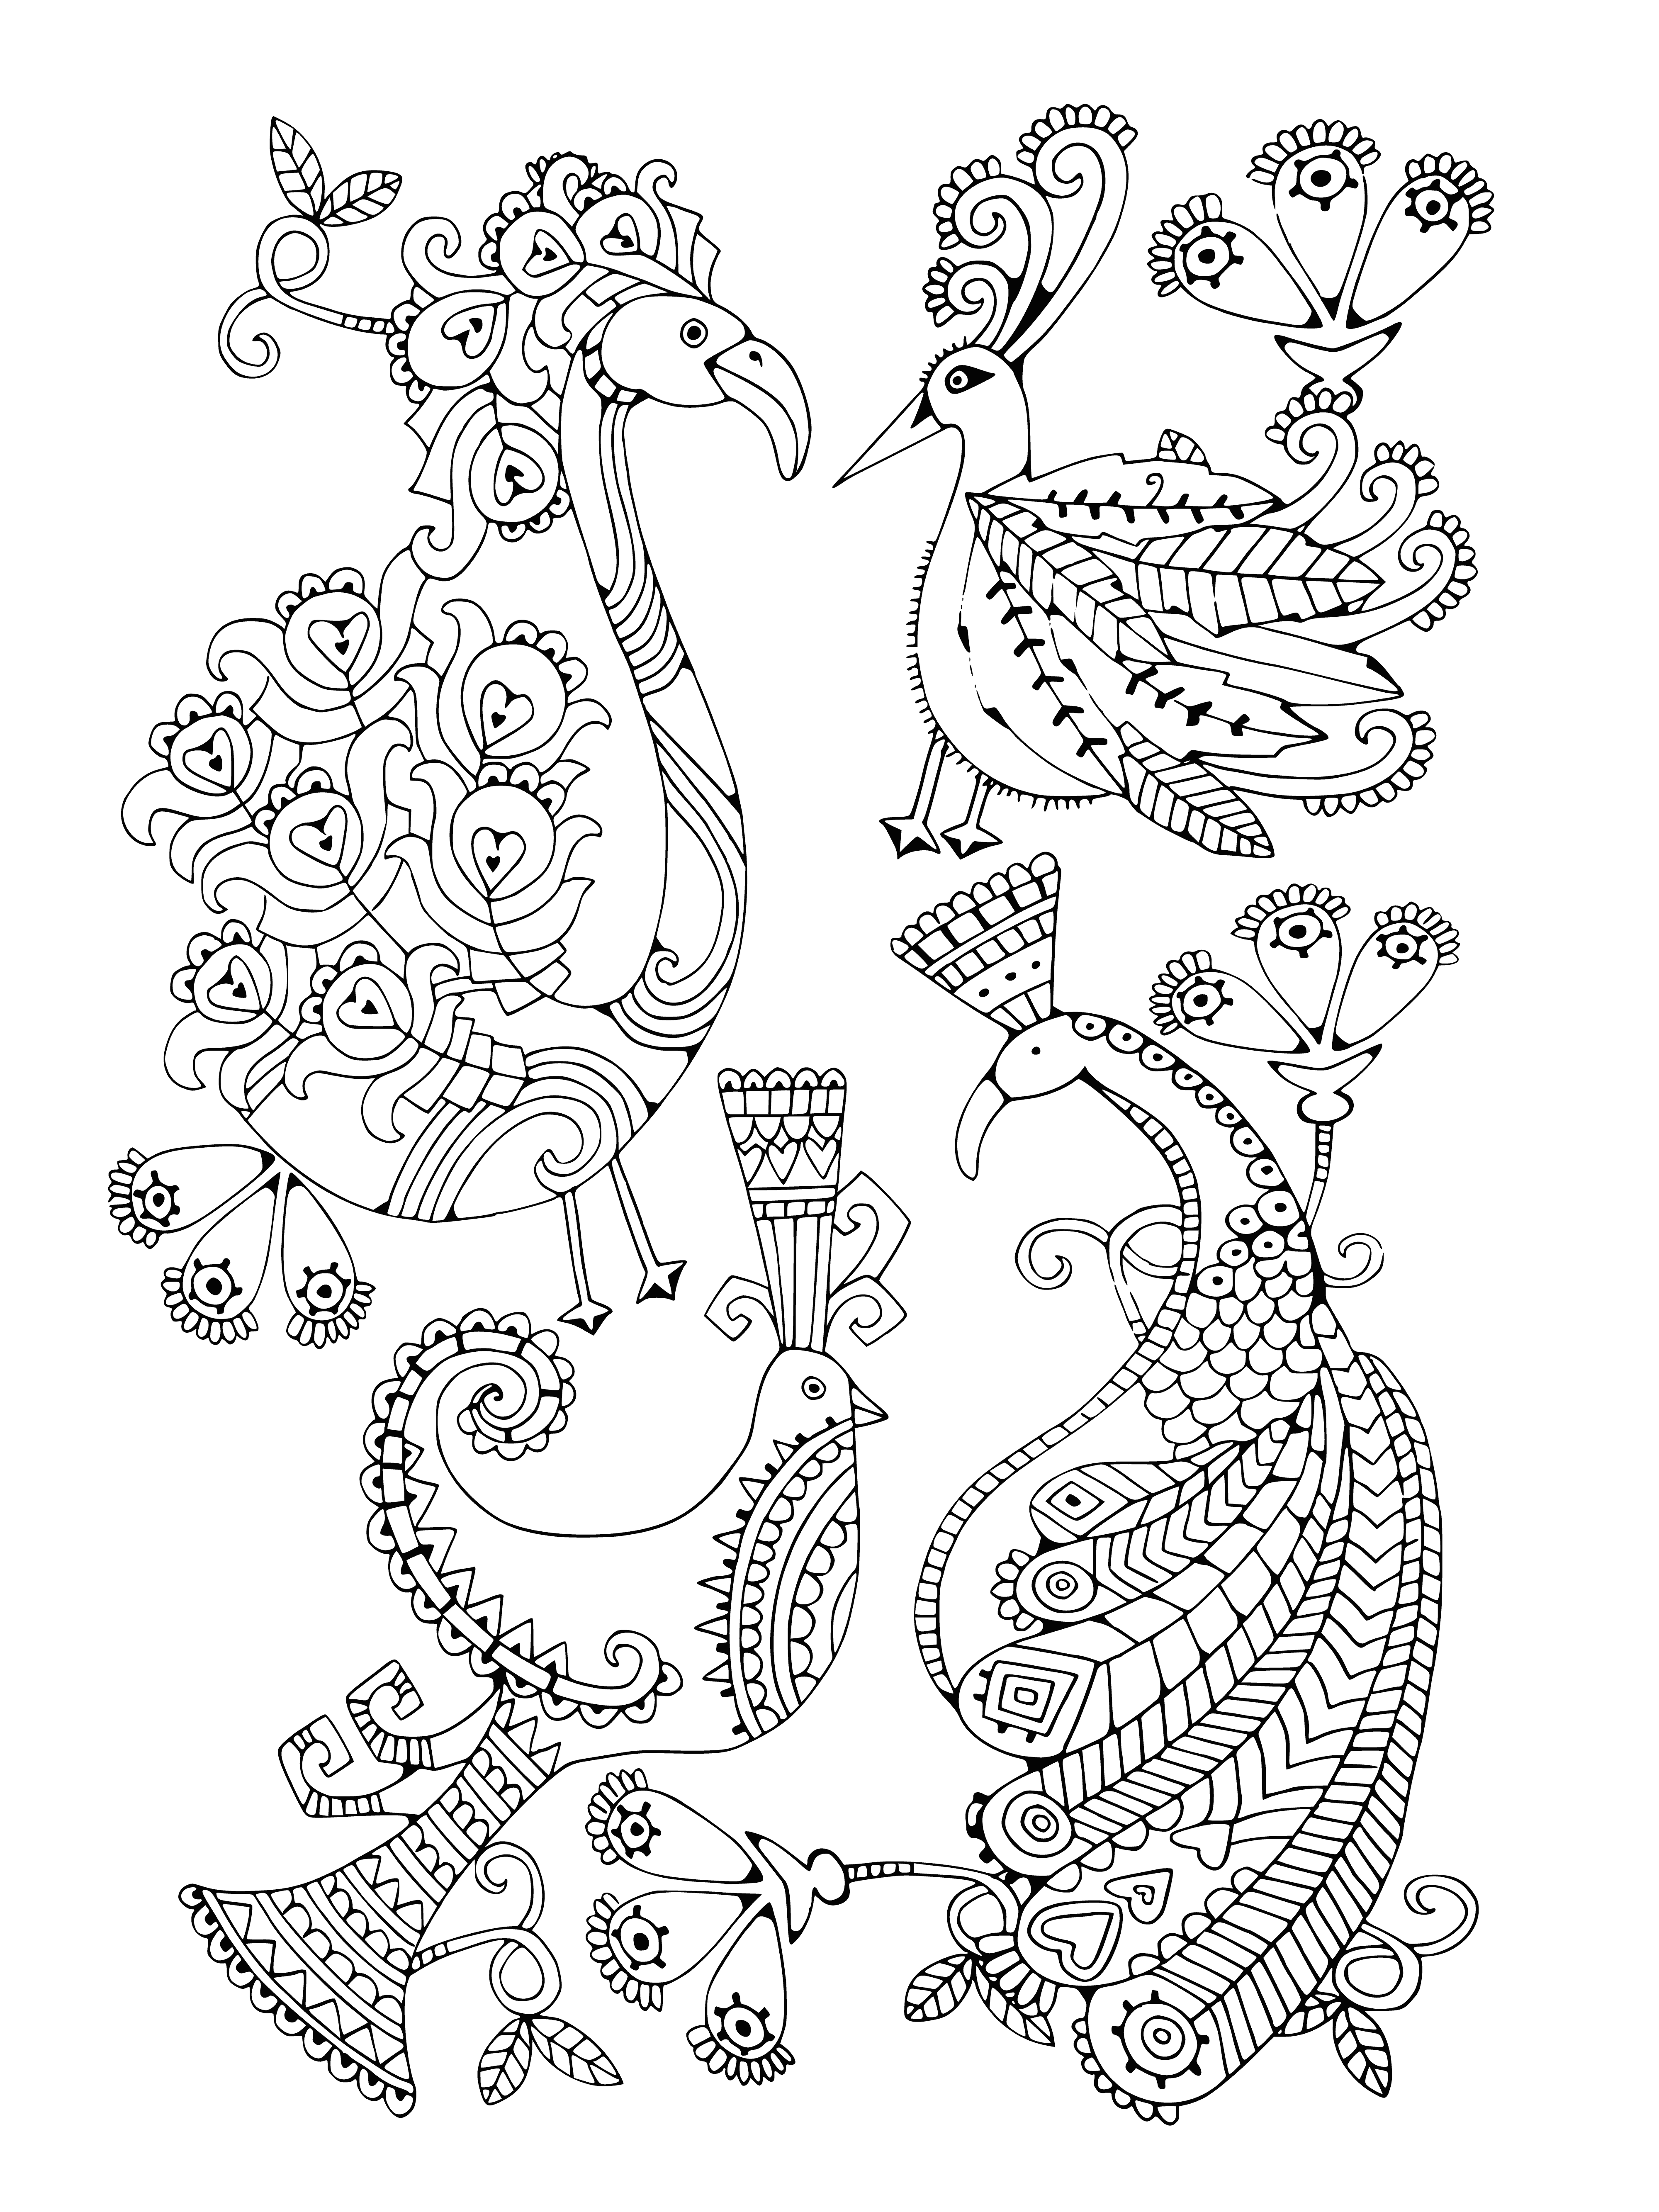 Fabulous birds coloring page